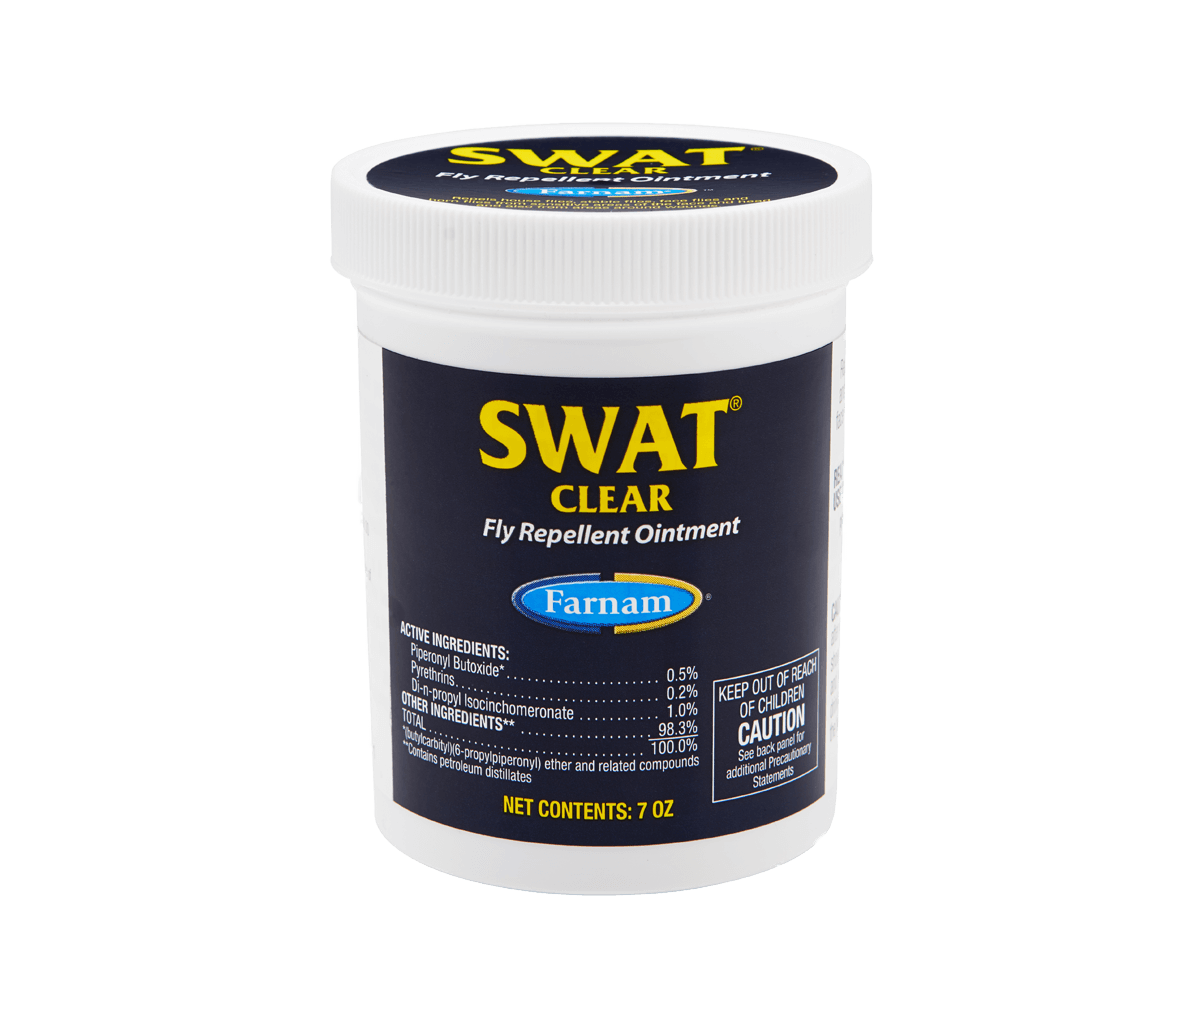 SWAT_7oz-Clear_100532426_Product-Image